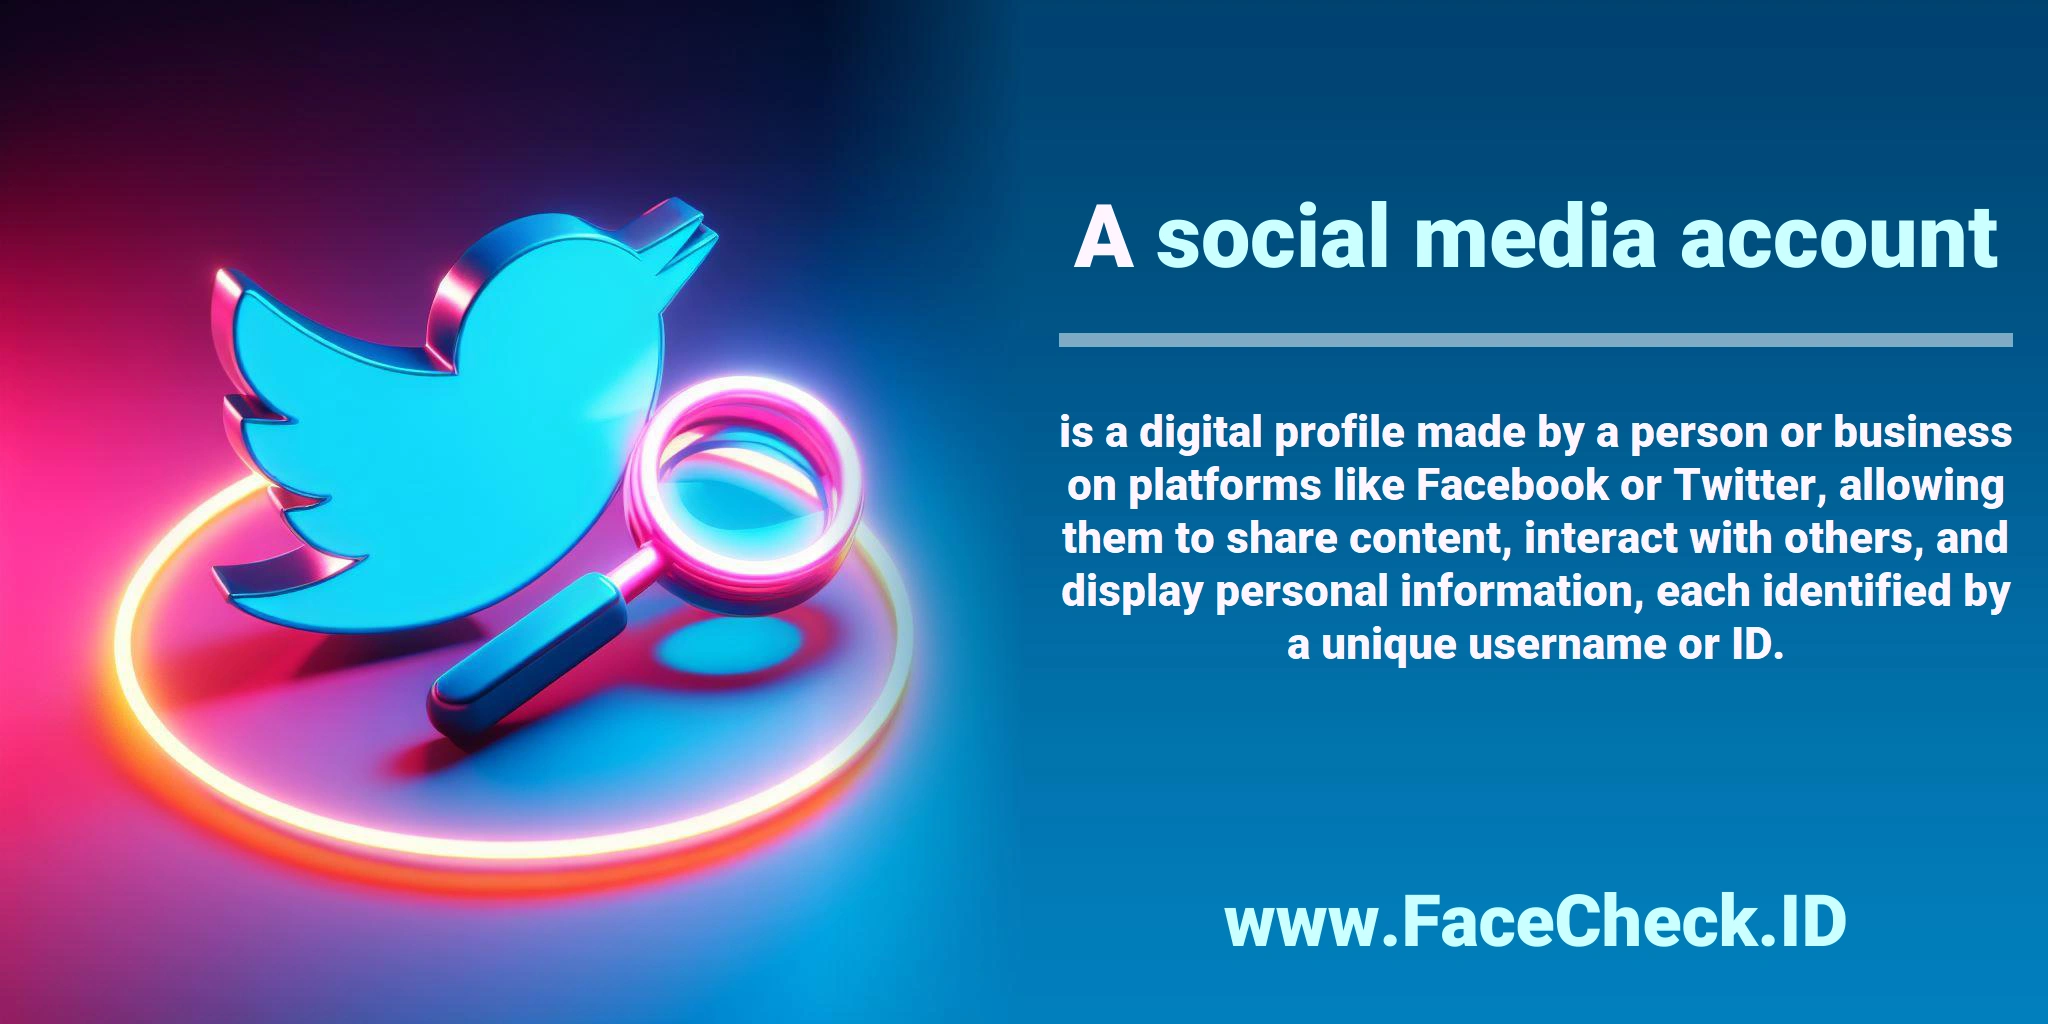 A <b>social media account</b> is a digital profile made by a person or business on platforms like Facebook or Twitter, allowing them to share content, interact with others, and display personal information, each identified by a unique username or ID.